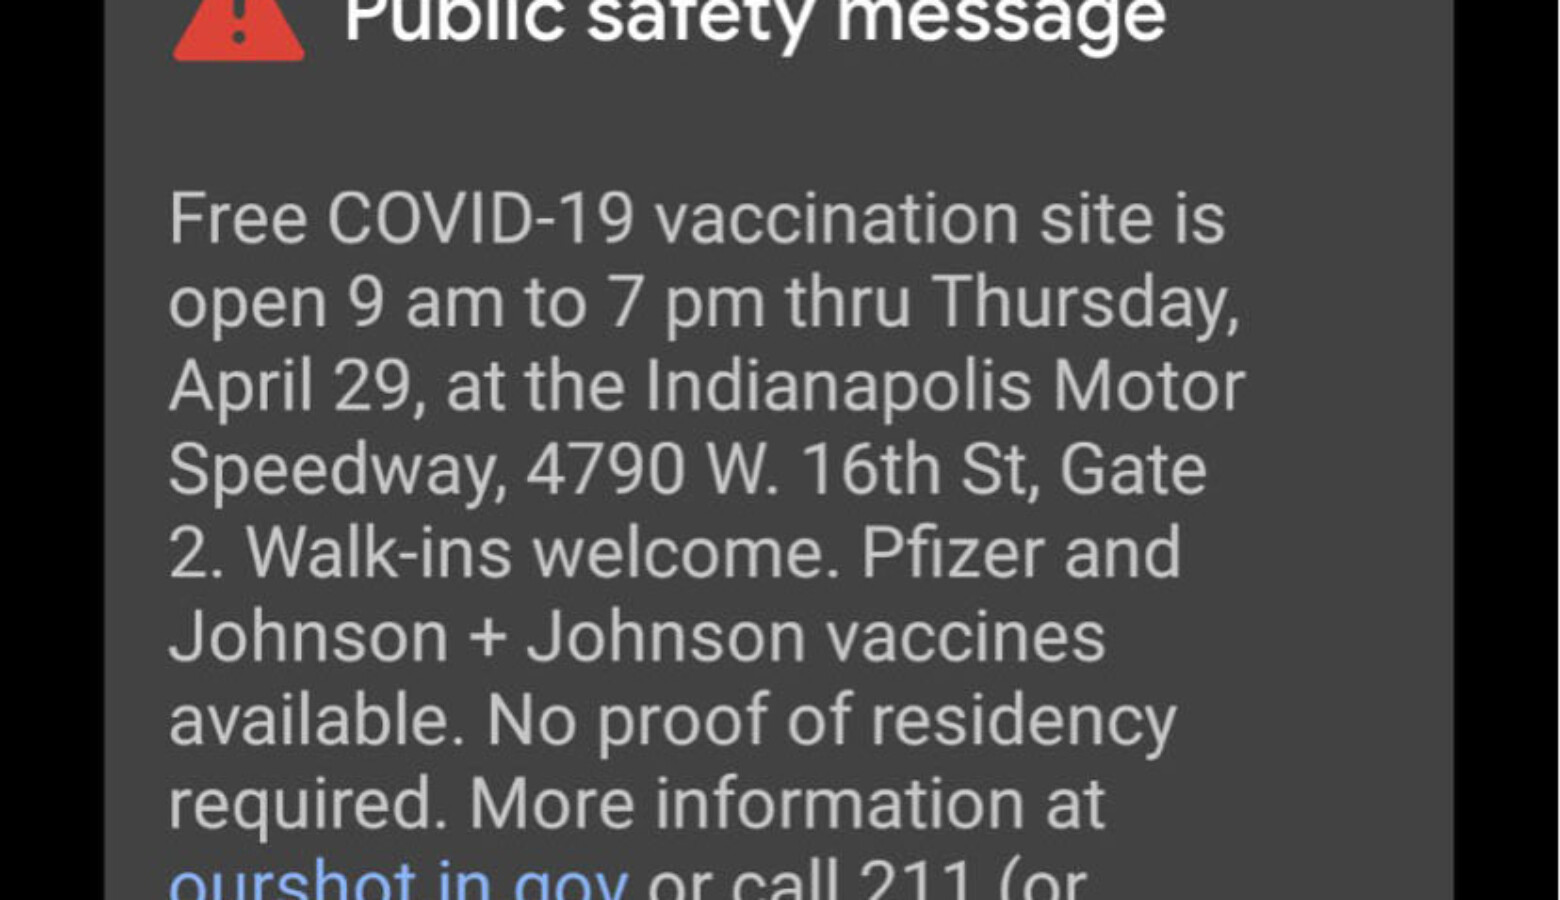 The Indiana Department of Health said it saw an increase in COVID-19 vaccination walk-ins at the mass clinic in Gary after using a public alert. (Screenshot of public alert)